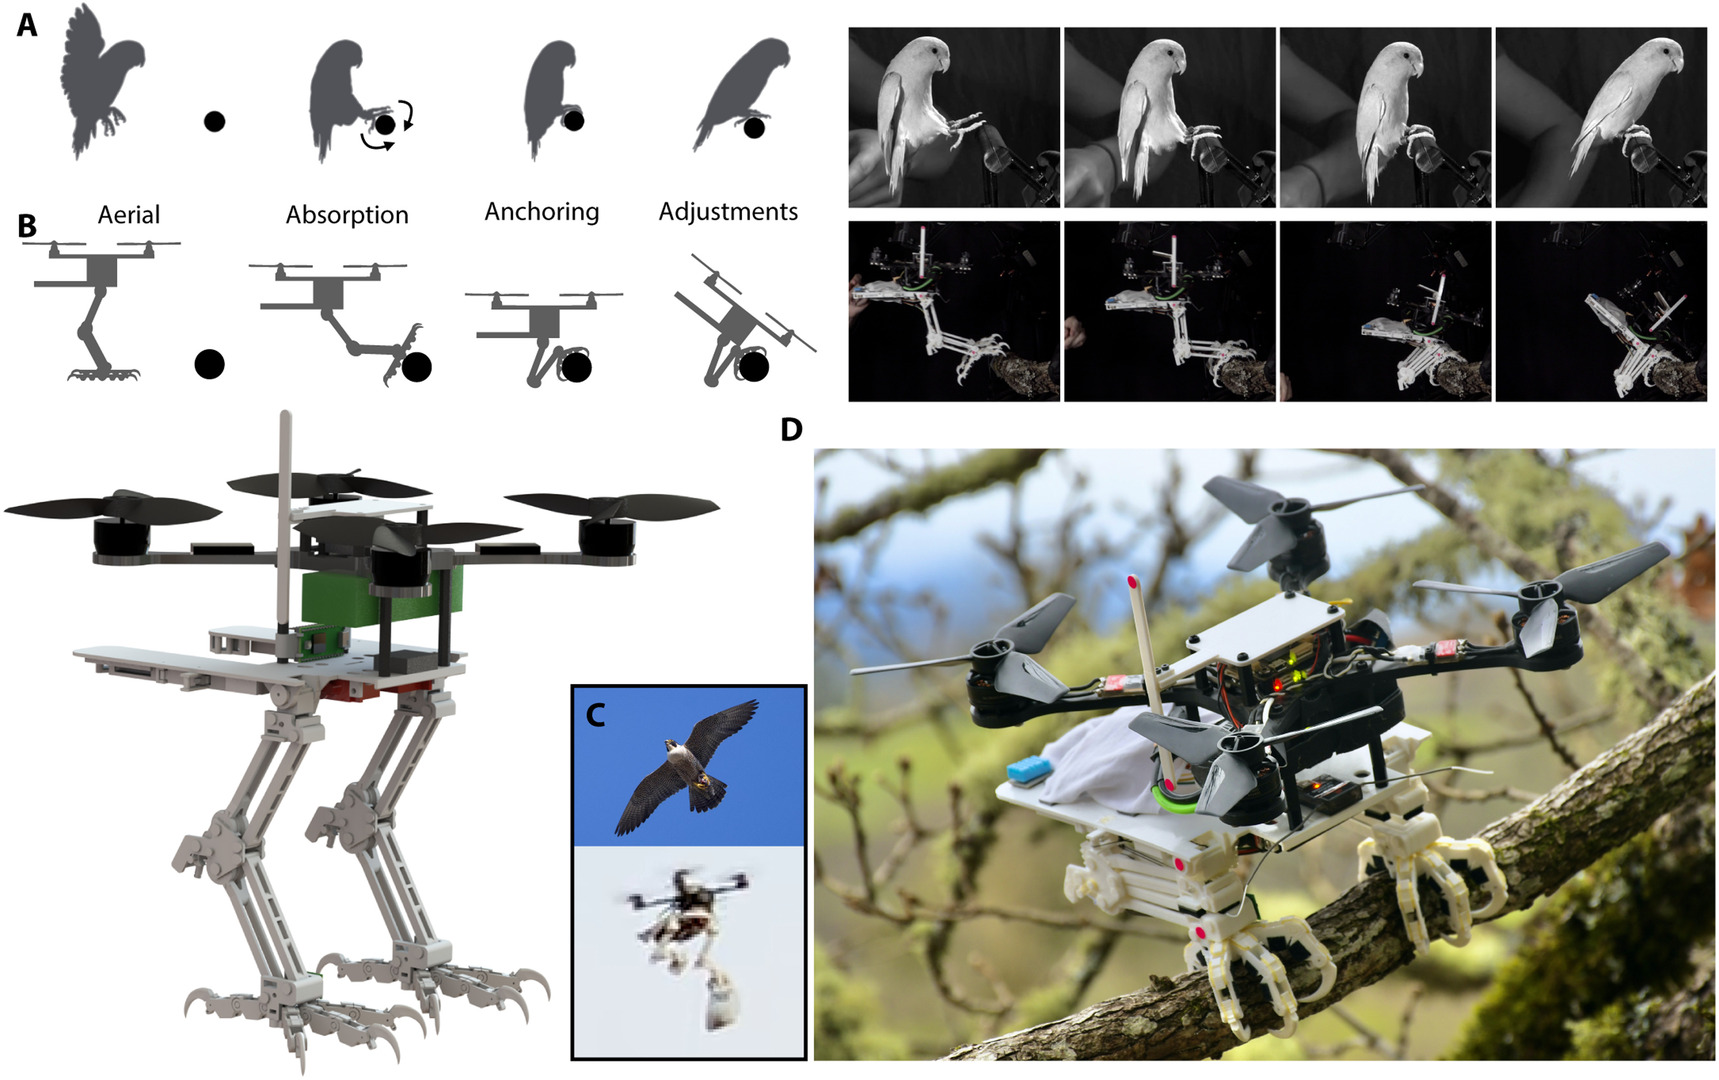 Engineers develop a robot that mimics the abilities of birds to take off and land with legs similar to peregrine falcons